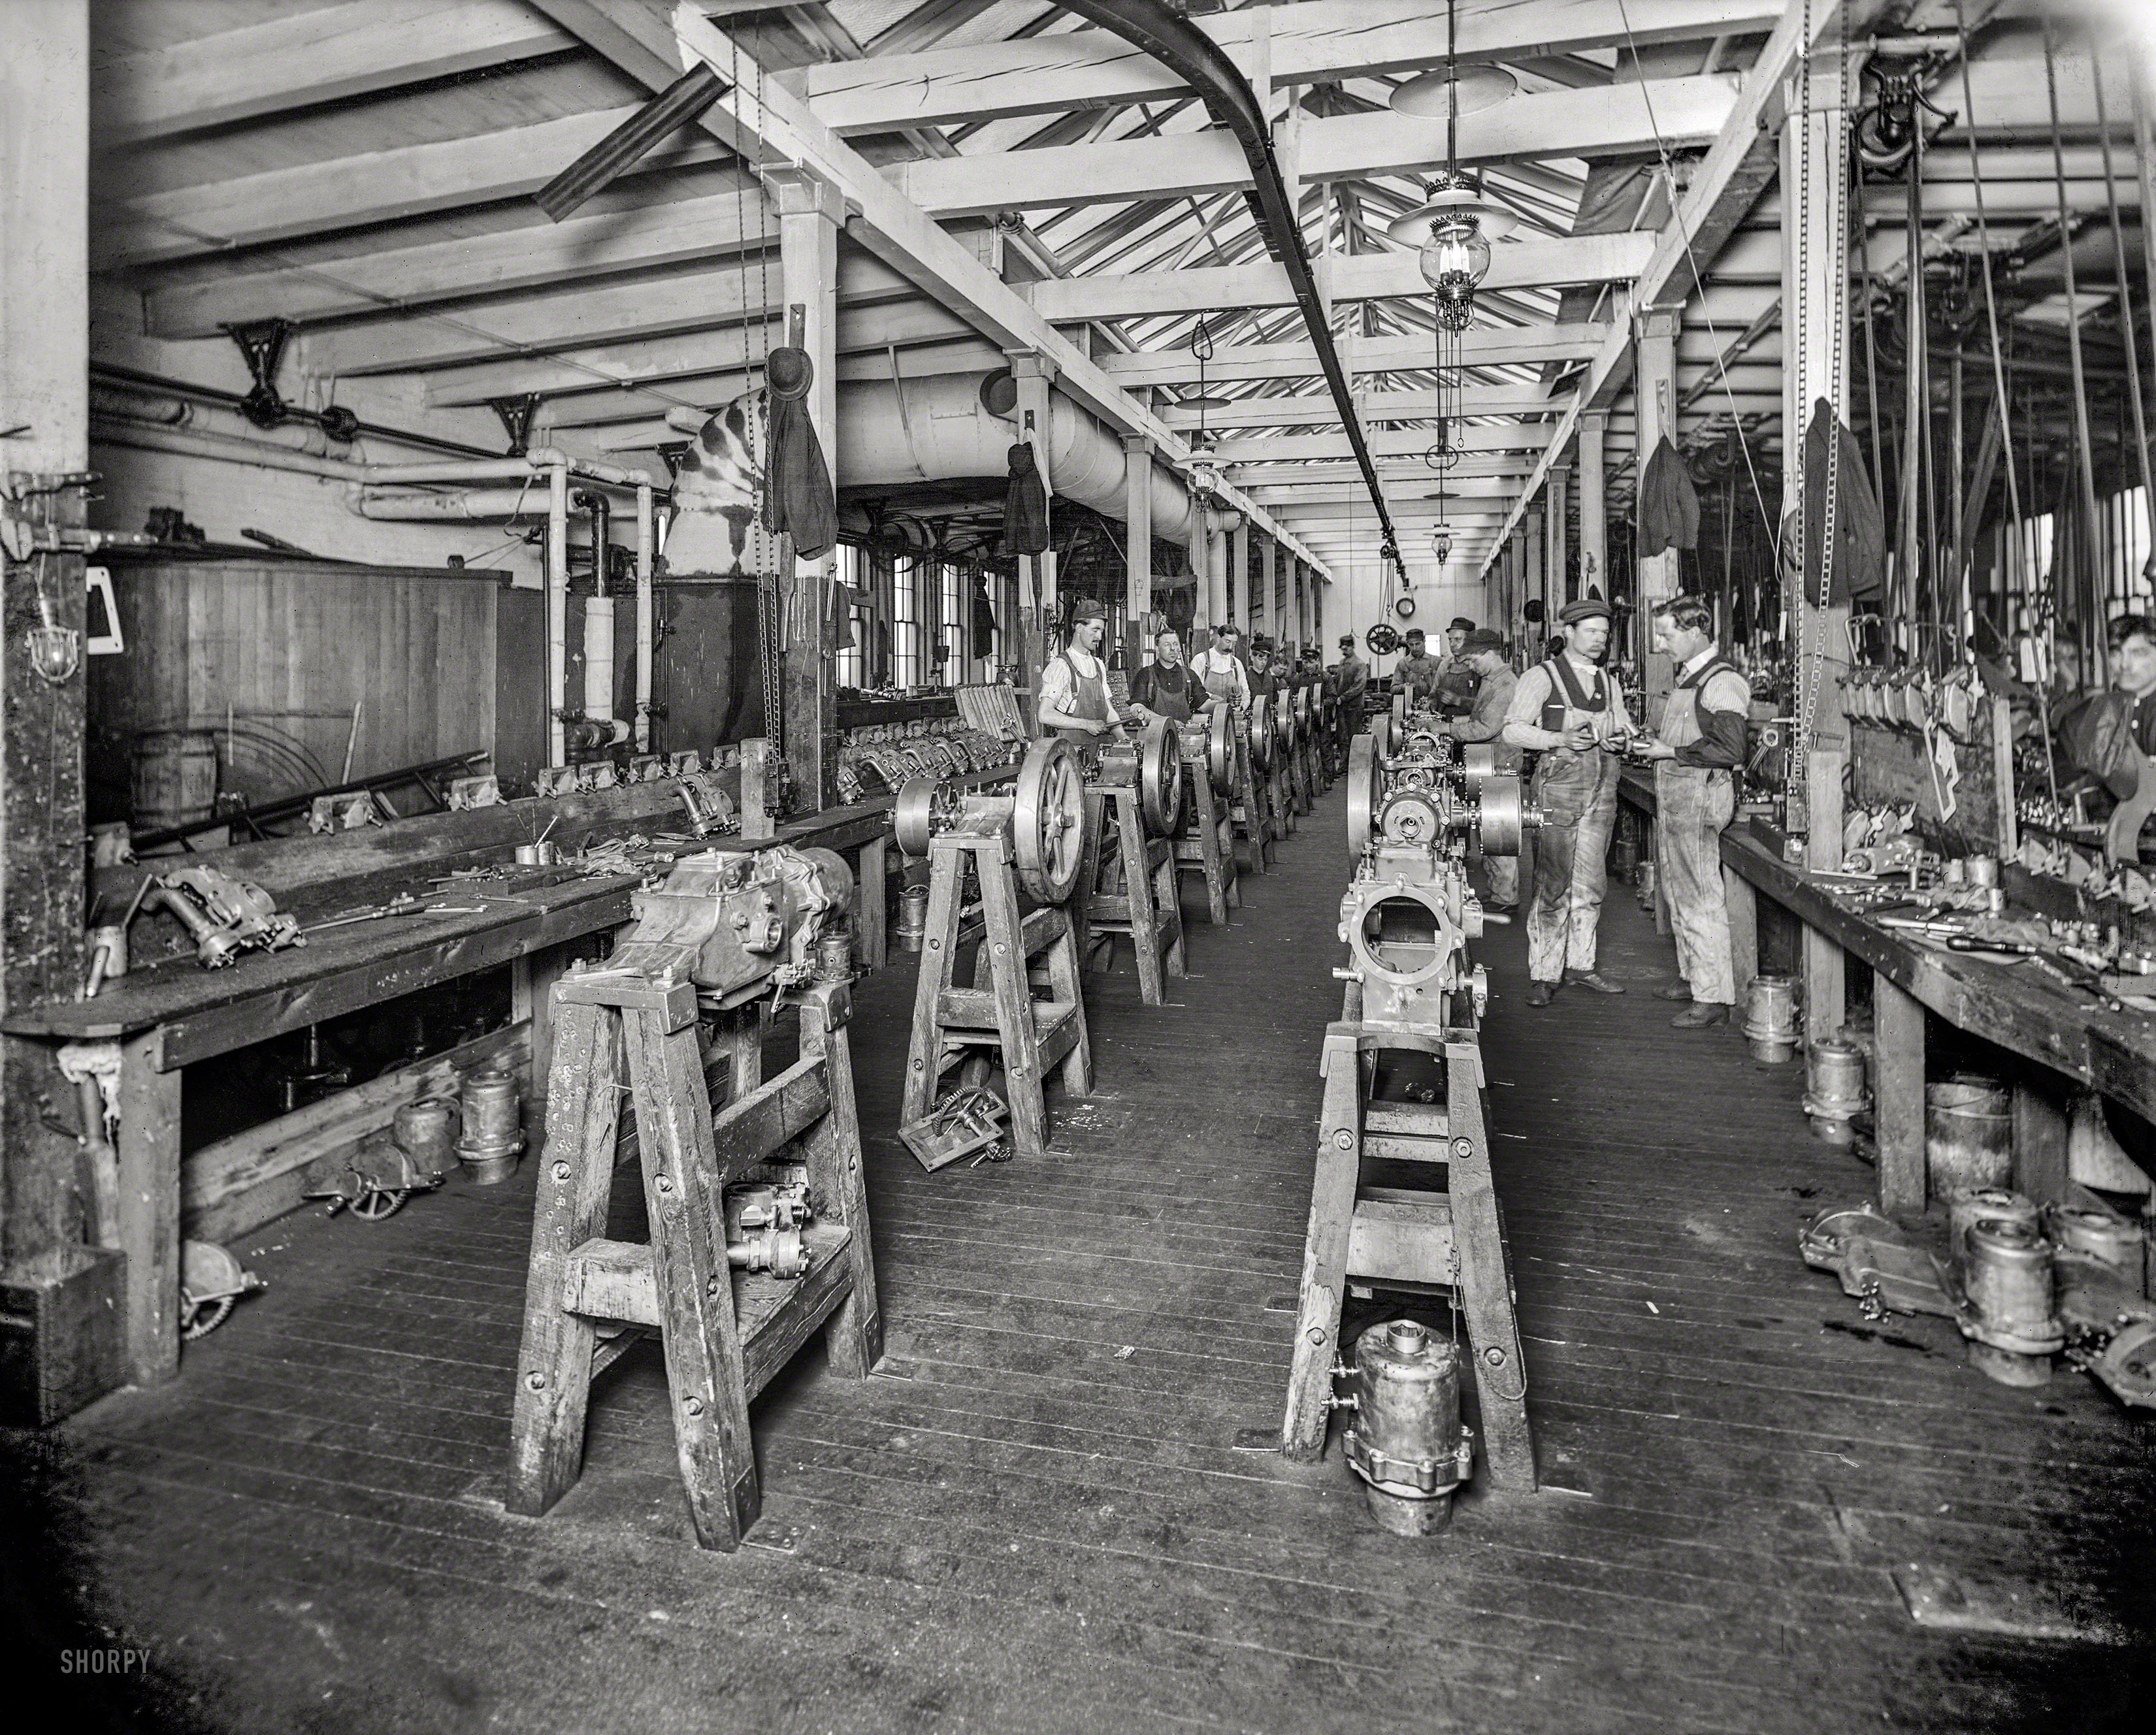 November 1903. "Assembling room, Leland & Faulconer Manufacturing Co., Detroit. Men working in foundry and machine shop that produced automobile engines and merged with Cadillac Motor Co. in 1905." 8x10 inch dry plate glass negative, Detroit Publishing Company. View full size.